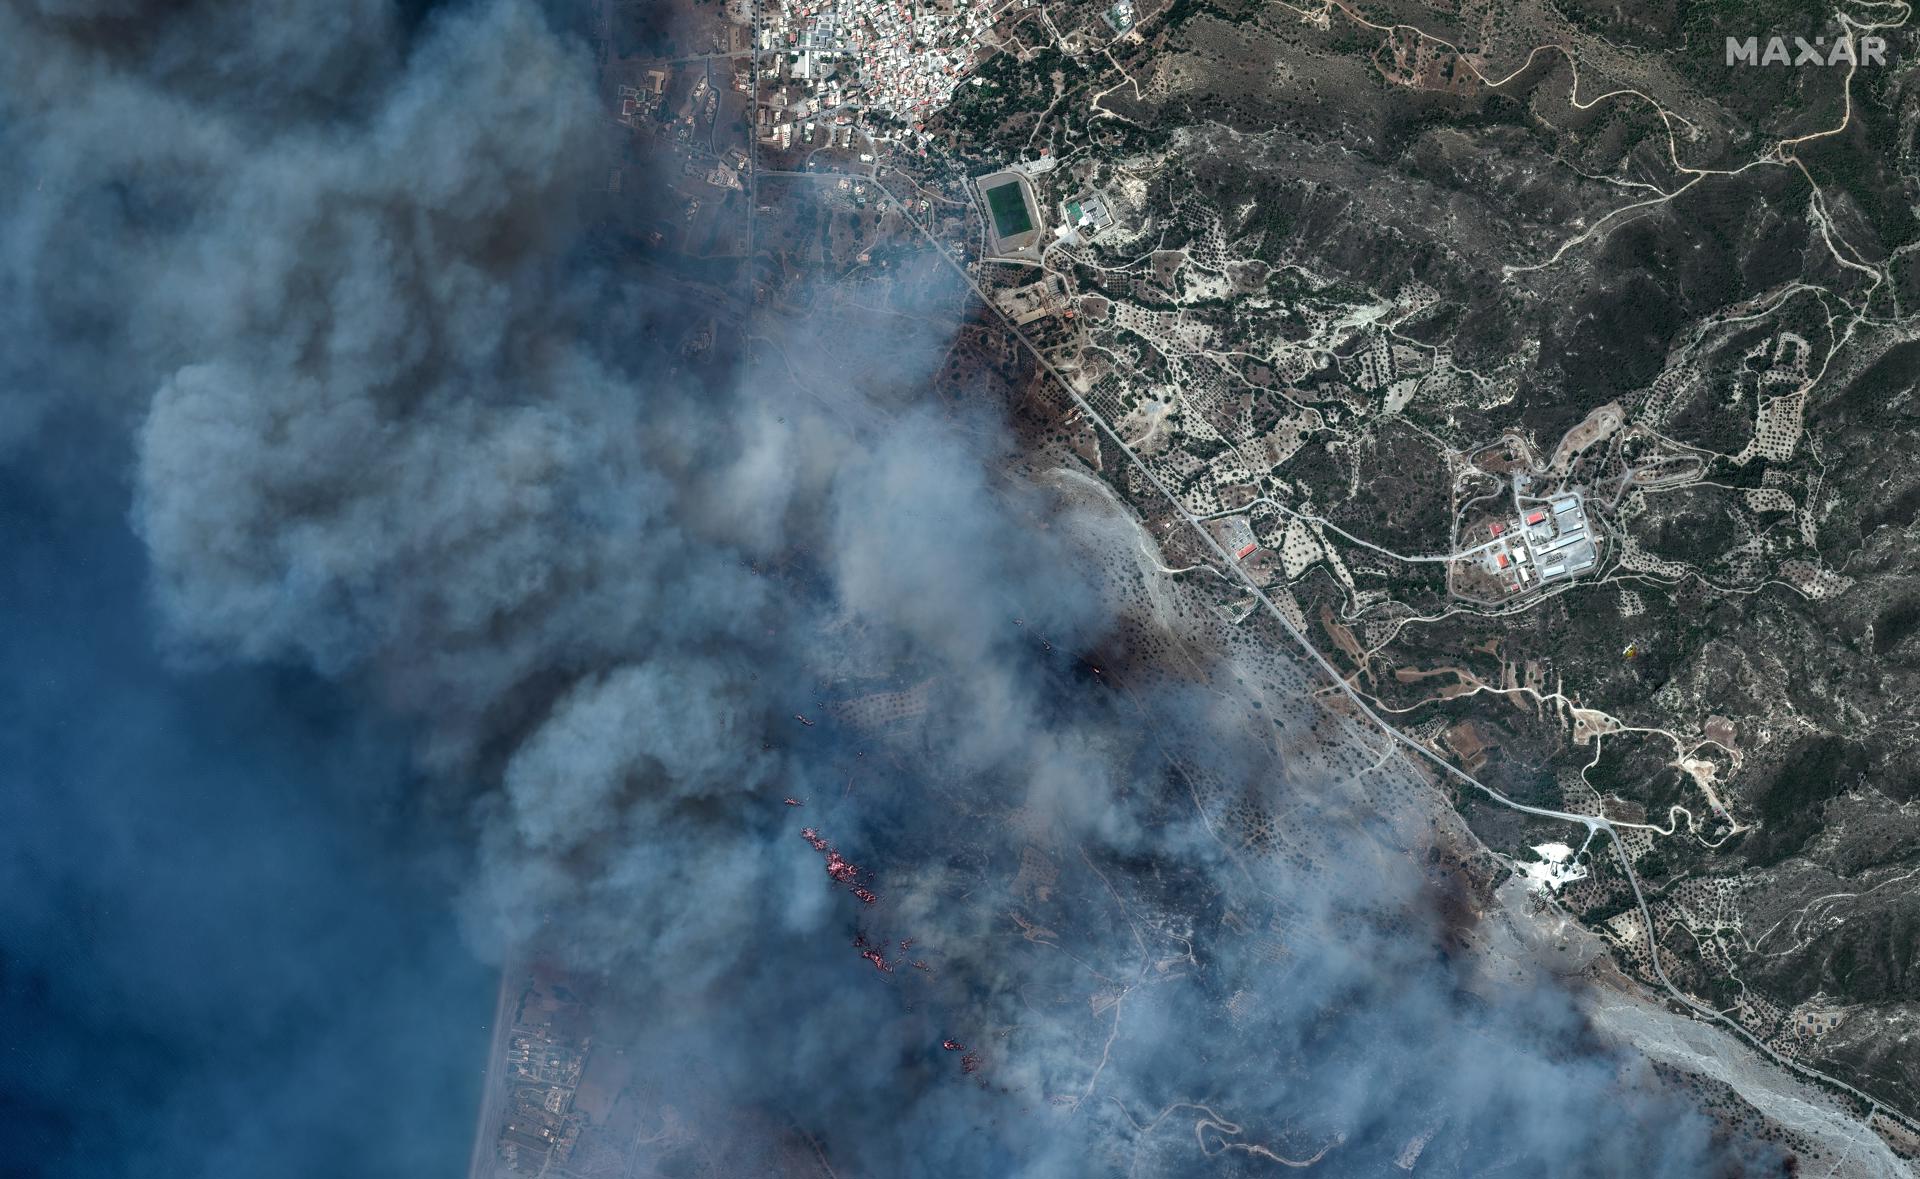 Rhodes (Greece), 24/07/2023.- A satellite image made available by Maxar Technologies shows wildfires near the coastline and Gemadi, Rhodes, Greece 24 July 2023. Firefighting forces along with volunteers in Rhodes, Corfu, Egio, Karystos and Yliki battled wildfires throughout the night, while airplanes started to operate early in the morning 24 July. A total of 99 firefighters, 35 water trucks and four teams on foot, two aircraft, two helicopters and the Olympos operational centre are operating in the area. (incendio forestal, Grecia) EFE/EPA/MAXAR TECHNOLOGIES HANDOUT MANDATORY CREDIT: SATELLITE IMAGE 2023 MAXAR TECHNOLOGIES -- The watermark may not be removed/cropped. HANDOUT EDITORIAL USE ONLY/NO SALES
